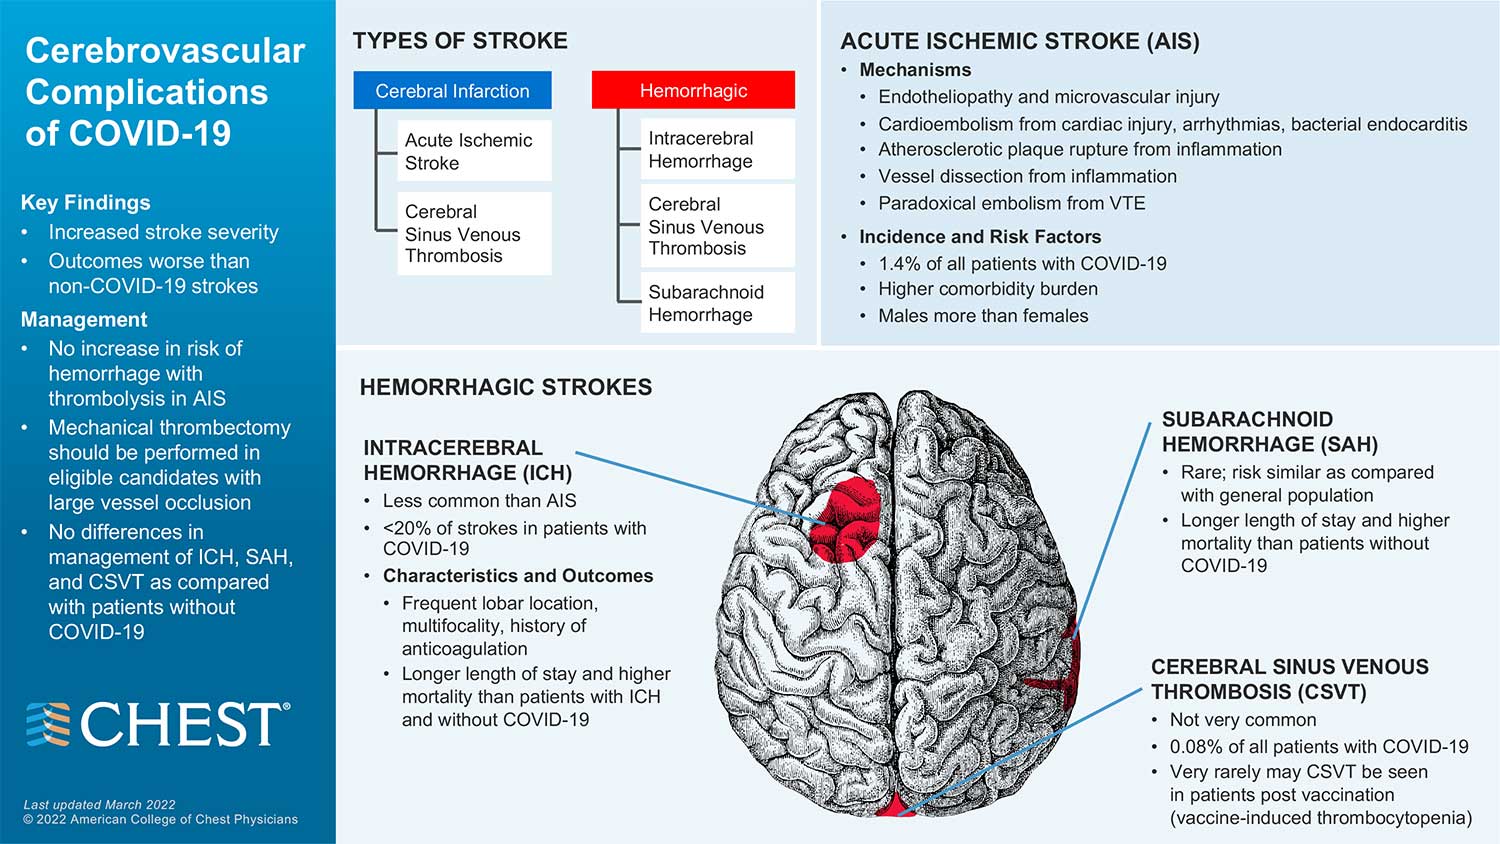 Cerebrovascular Complications of COVID-19 infographic